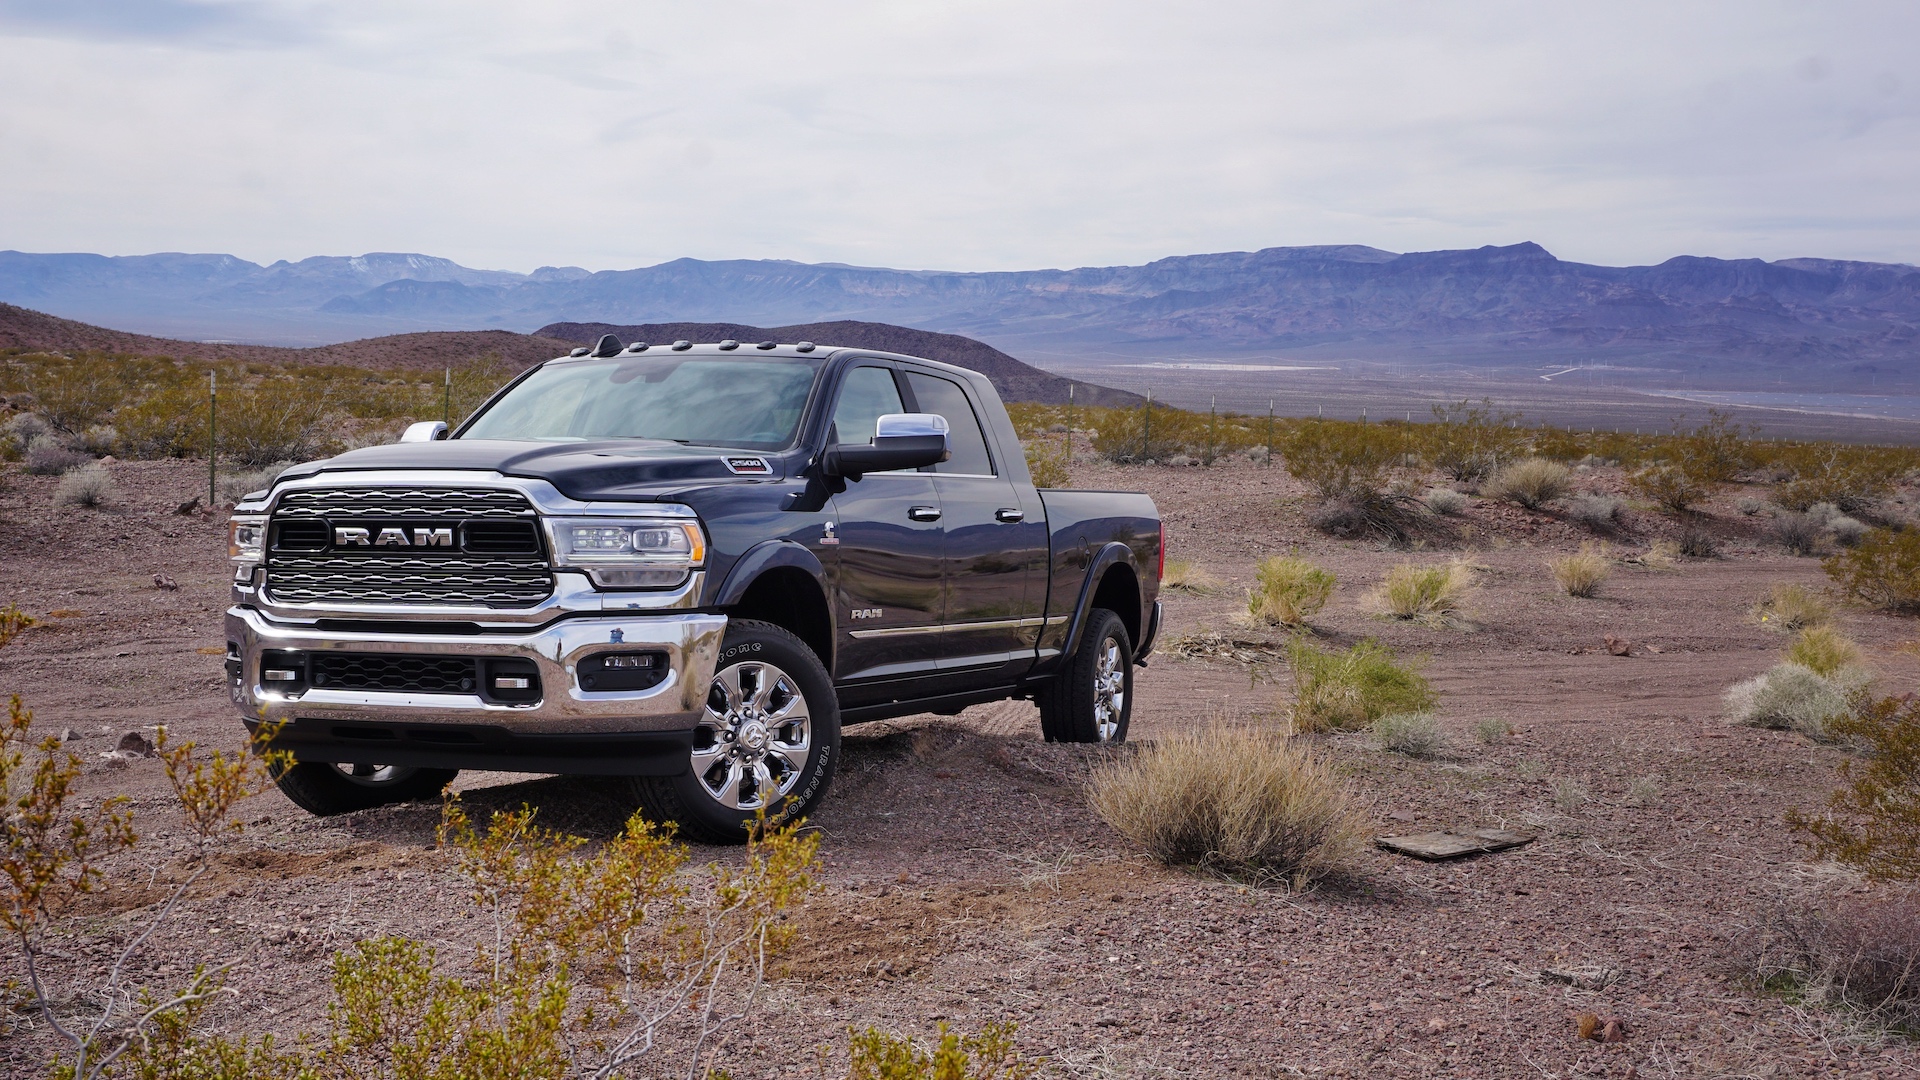 2019 Ram 2500 / 3500 Heavy Duty First Drive: The New King of Giant-Sized Pickup Trucks?